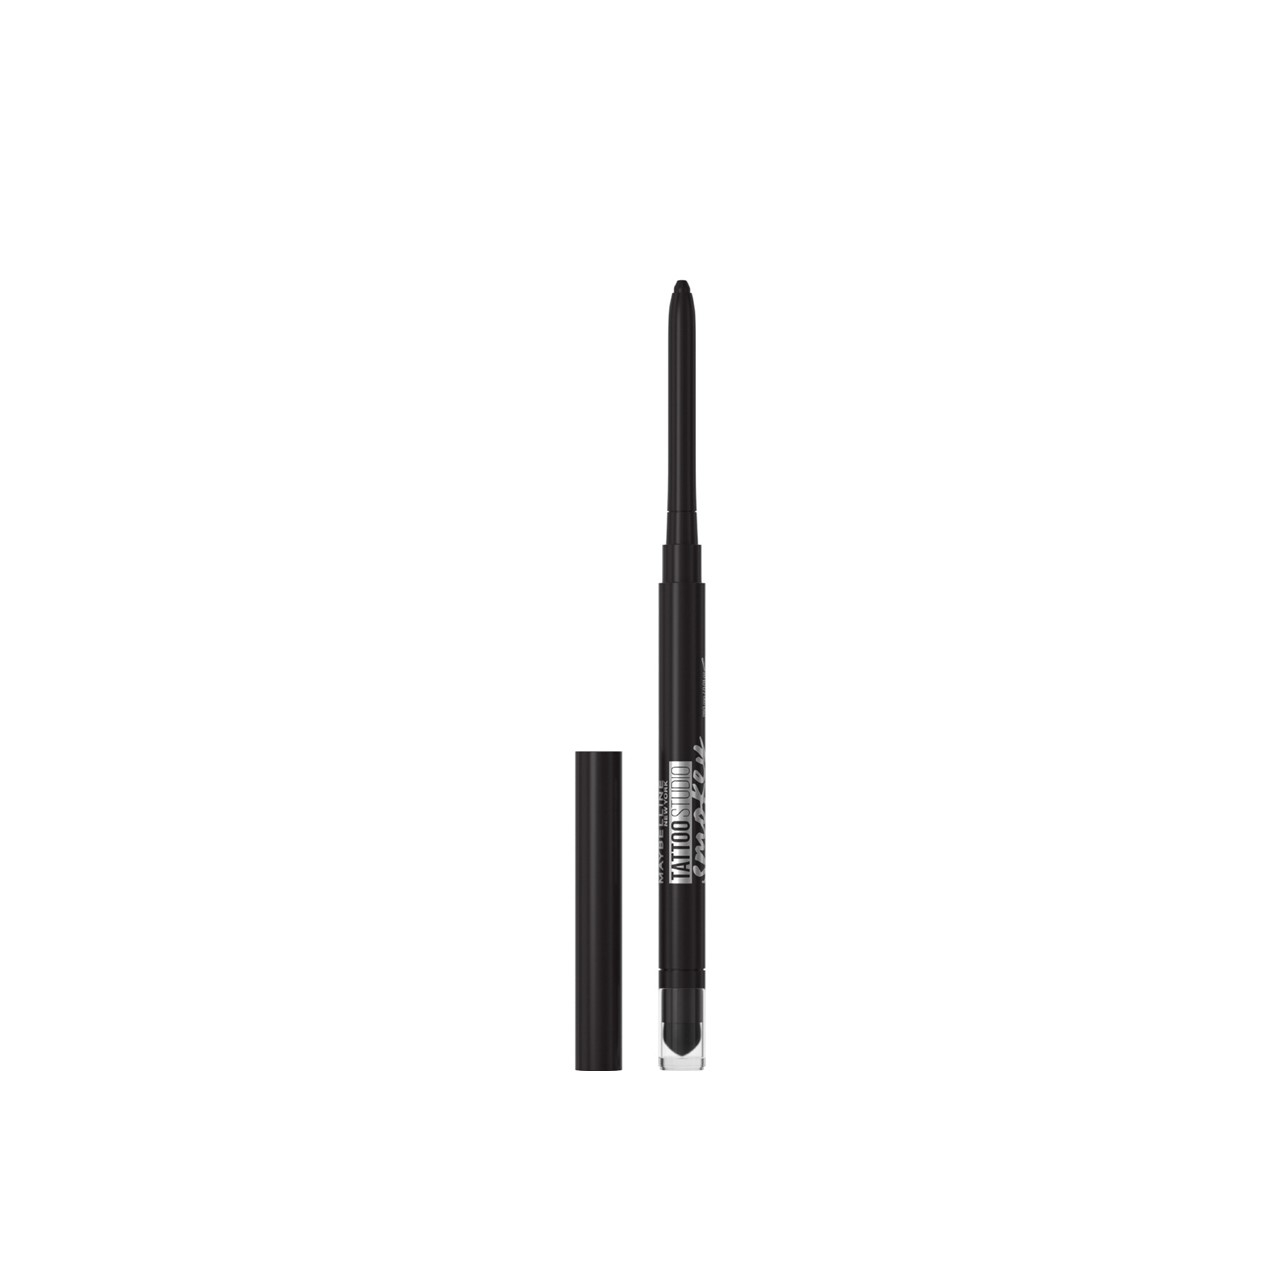 Maybelline Tattoo Liner Gel Pencil Eyeliner dramatically defines the  eyelash line with an ultra-intense color. The gel pencil is practical… |  Instagram